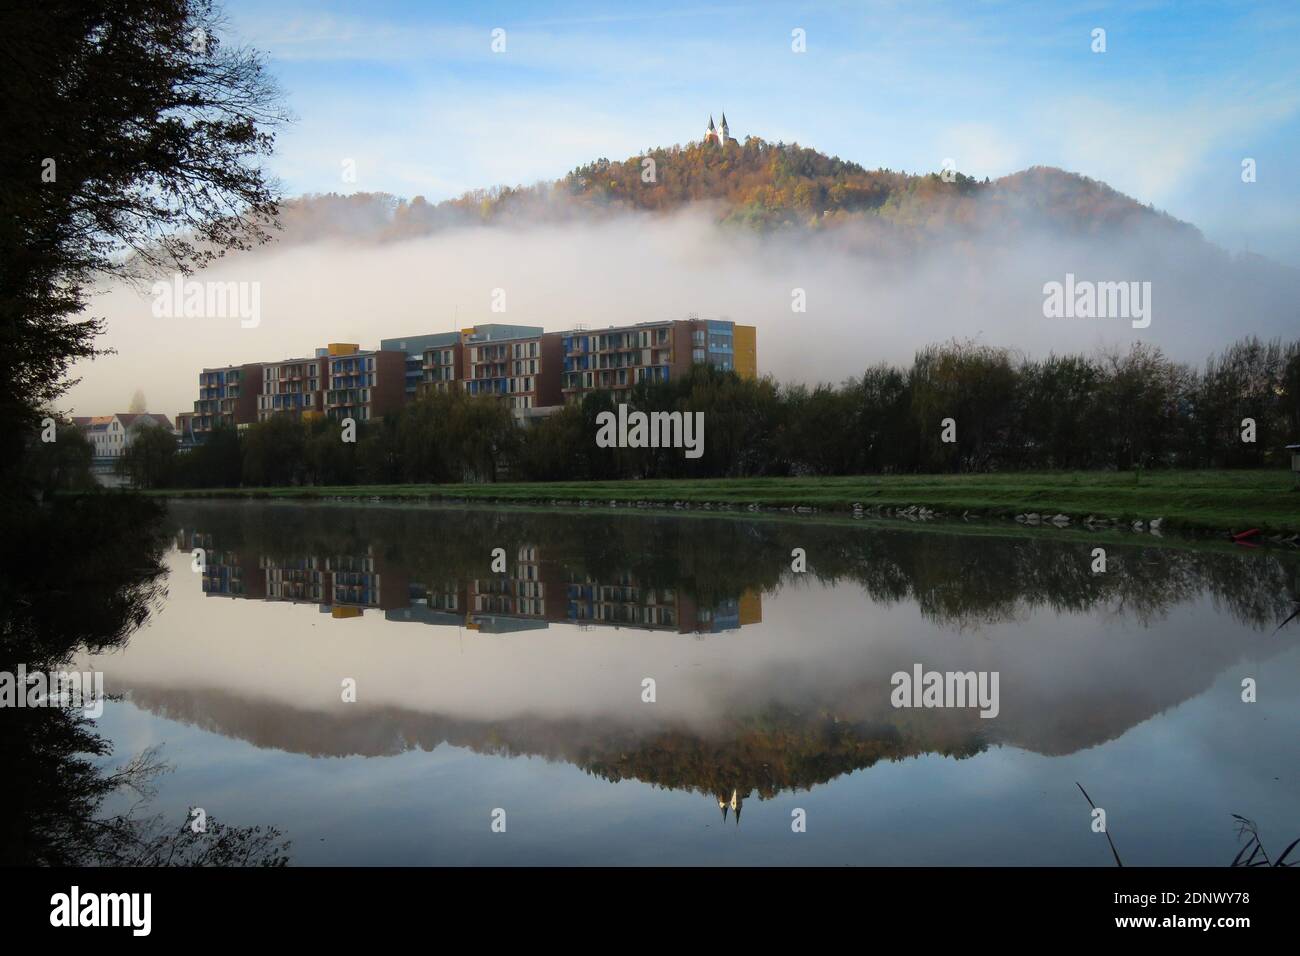 Reflection Of Trees And Buildings In Lake Against Sky Stock Photo